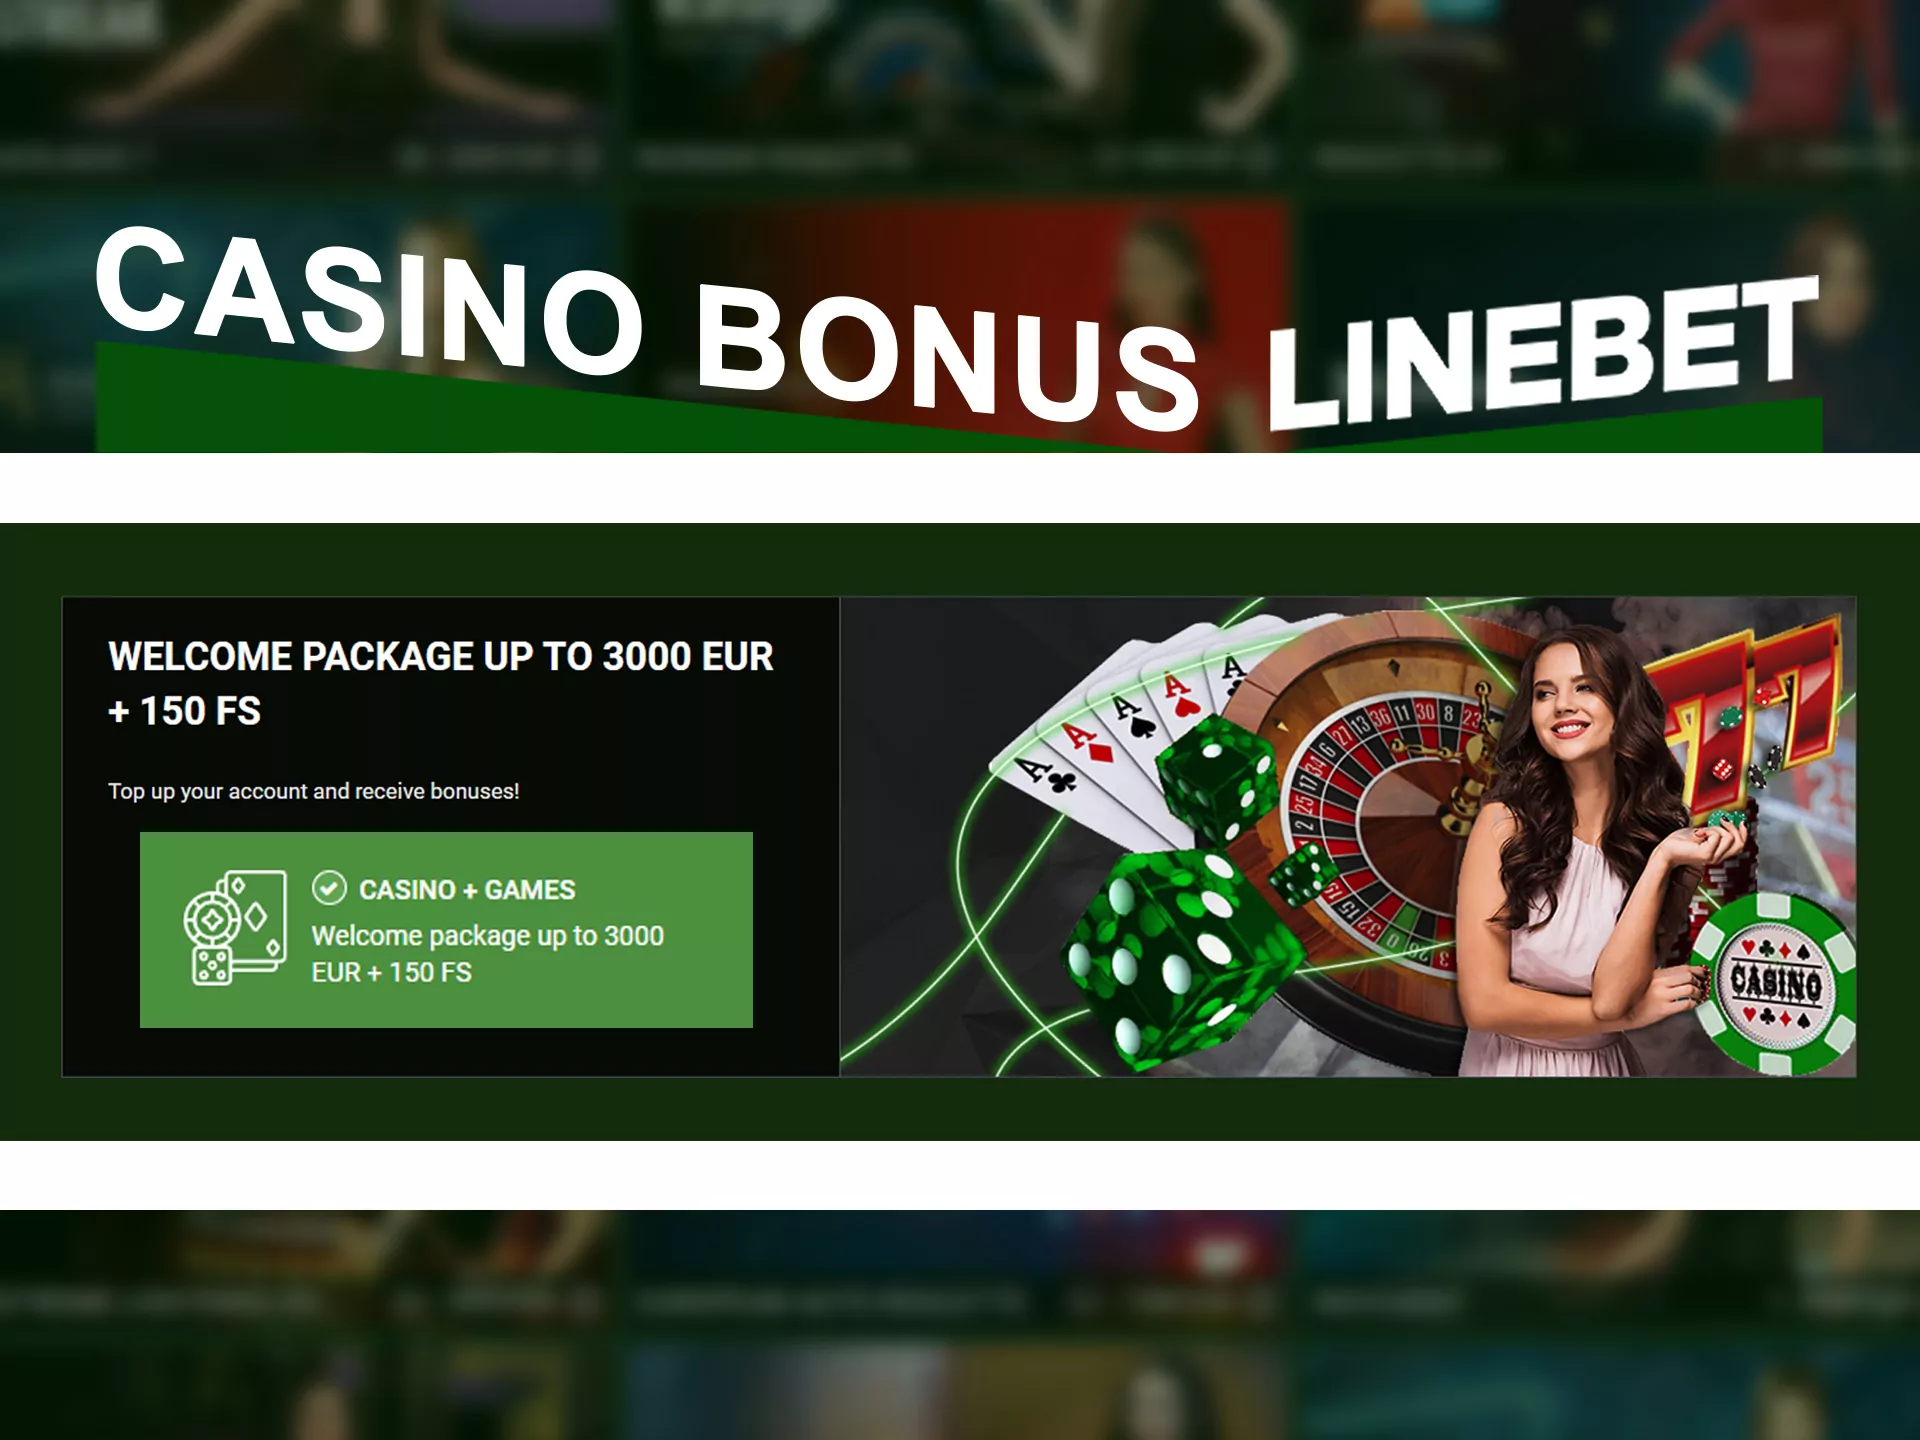 Use casino bonus after registration and win more at Linebet.